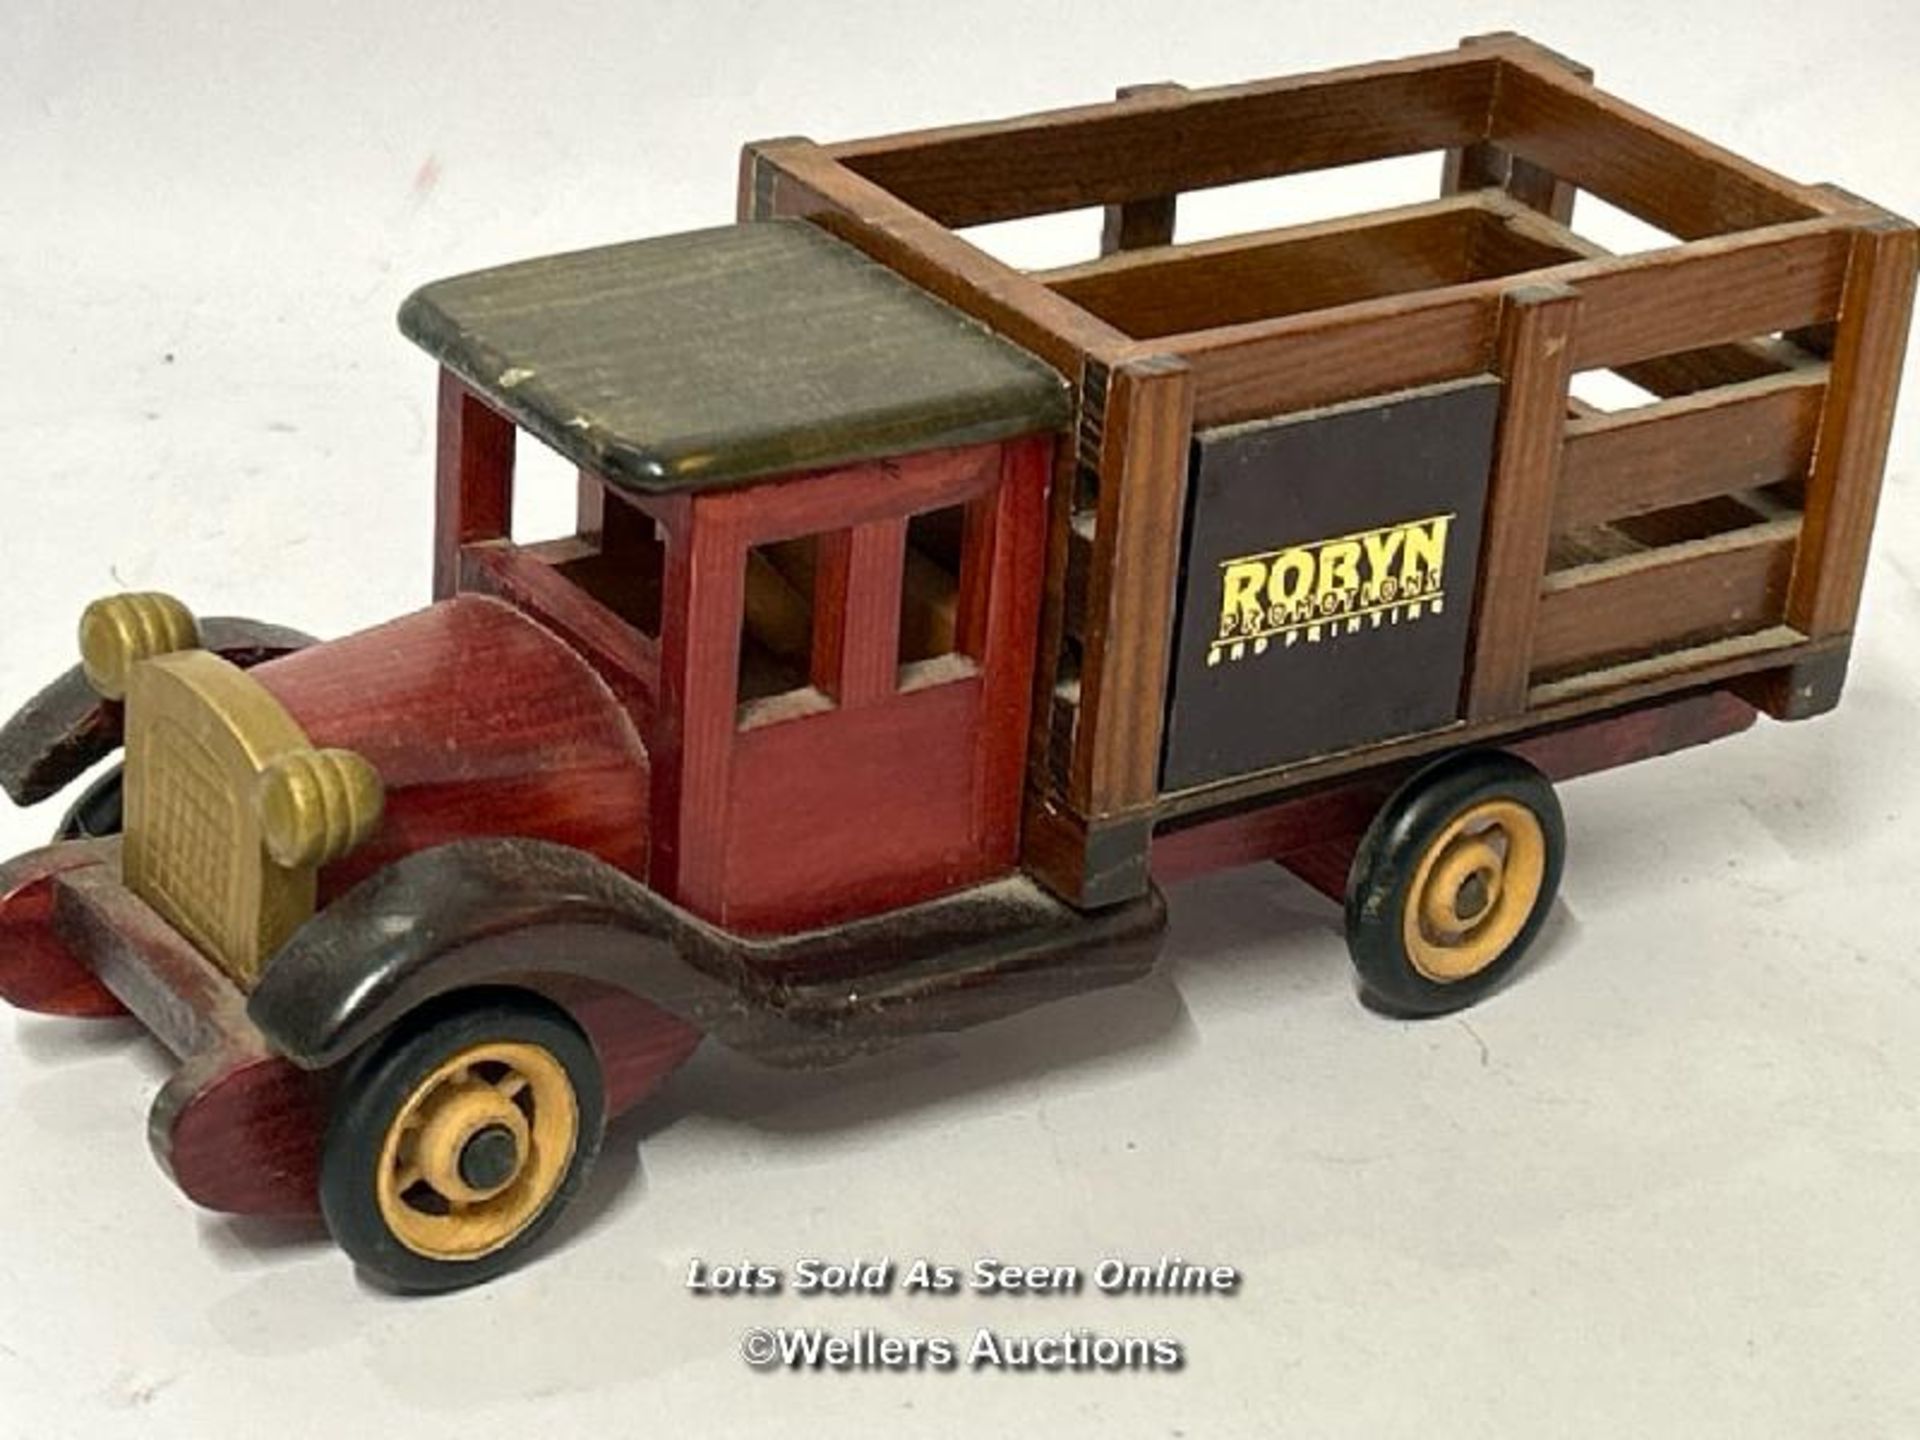 Vintage metal Pickford's Removals trailer model and wooden Robyn promotional truck model / AN10 - Image 4 of 4